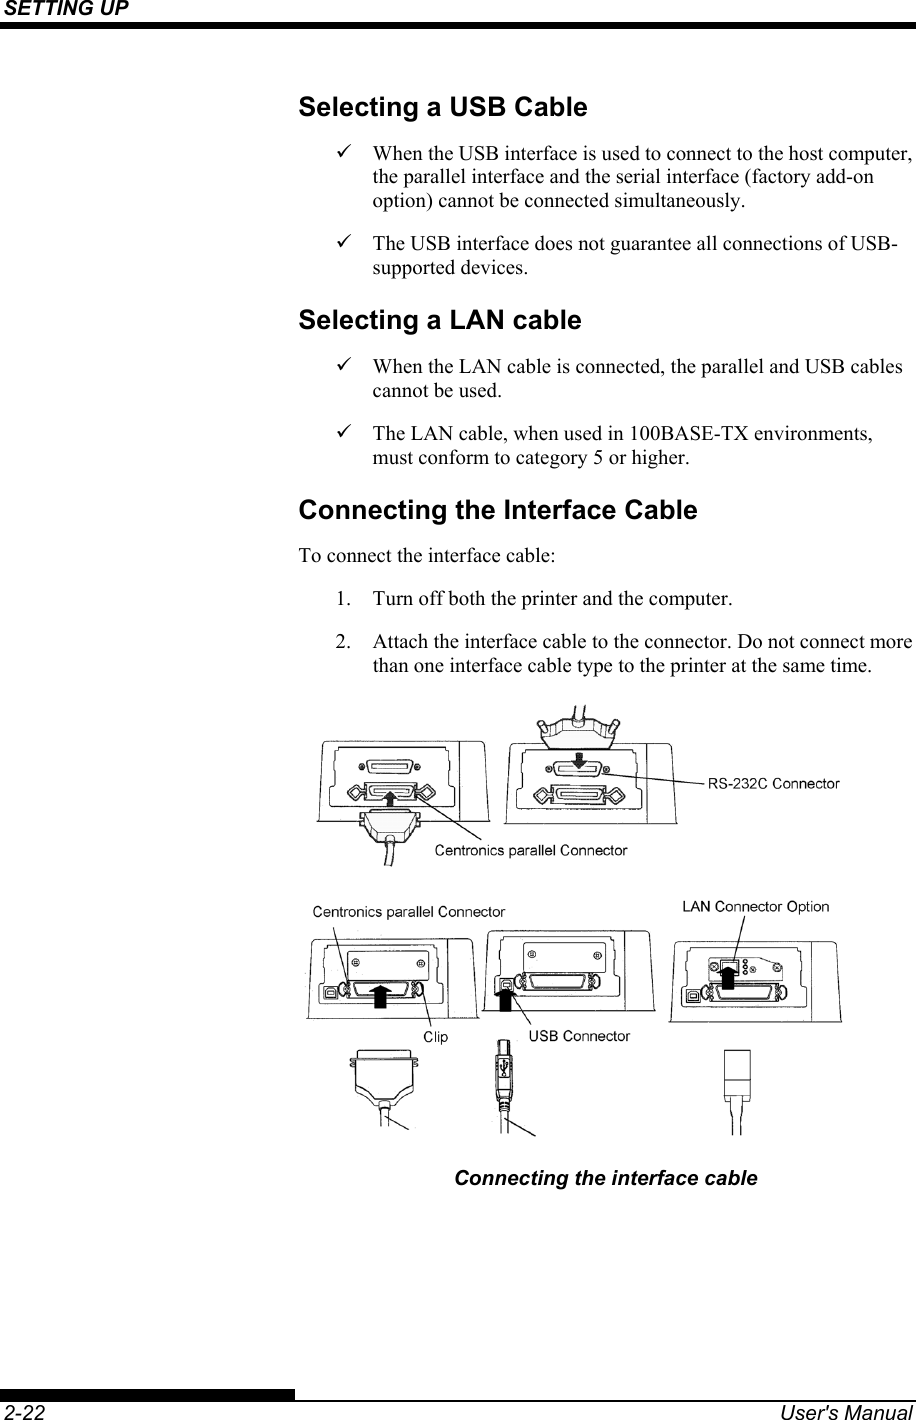 SETTING UP    2-22  User&apos;s Manual Selecting a USB Cable 9  When the USB interface is used to connect to the host computer, the parallel interface and the serial interface (factory add-on option) cannot be connected simultaneously. 9  The USB interface does not guarantee all connections of USB-supported devices. Selecting a LAN cable 9  When the LAN cable is connected, the parallel and USB cables cannot be used. 9  The LAN cable, when used in 100BASE-TX environments, must conform to category 5 or higher. Connecting the Interface Cable To connect the interface cable: 1.  Turn off both the printer and the computer. 2.  Attach the interface cable to the connector. Do not connect more than one interface cable type to the printer at the same time.  Connecting the interface cable 